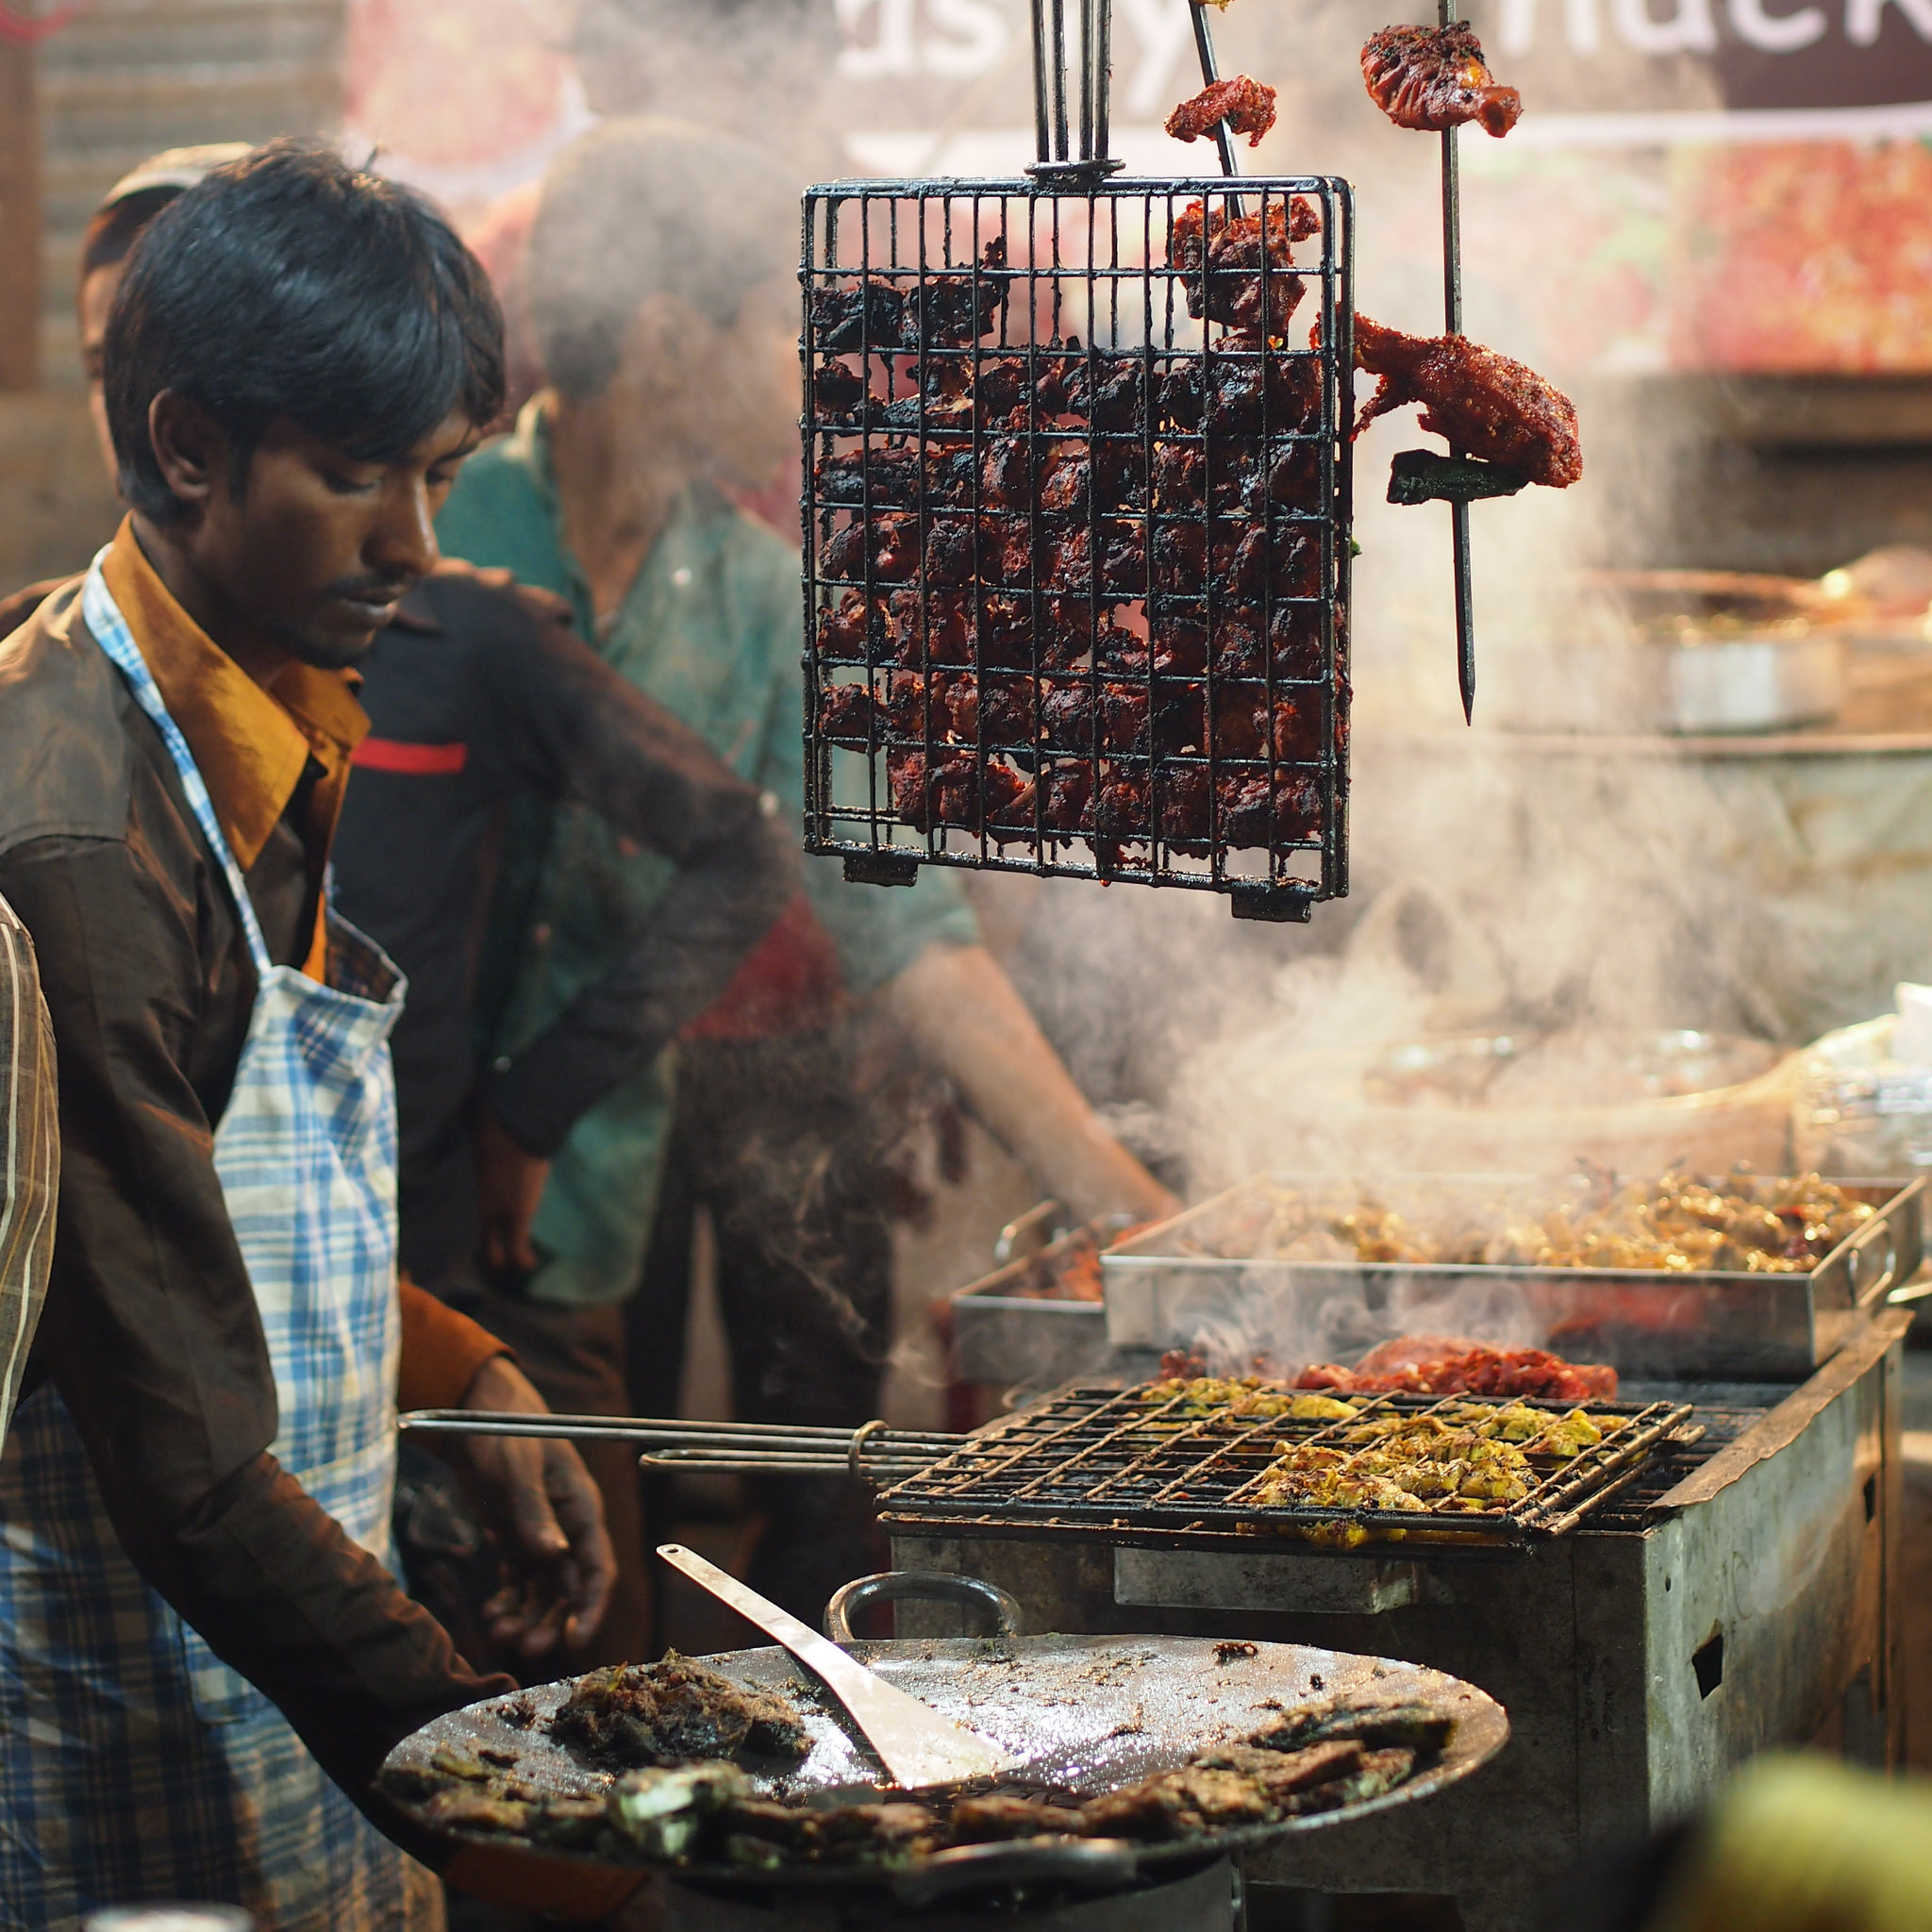 Where to Find the Best Street Food in Bangalore